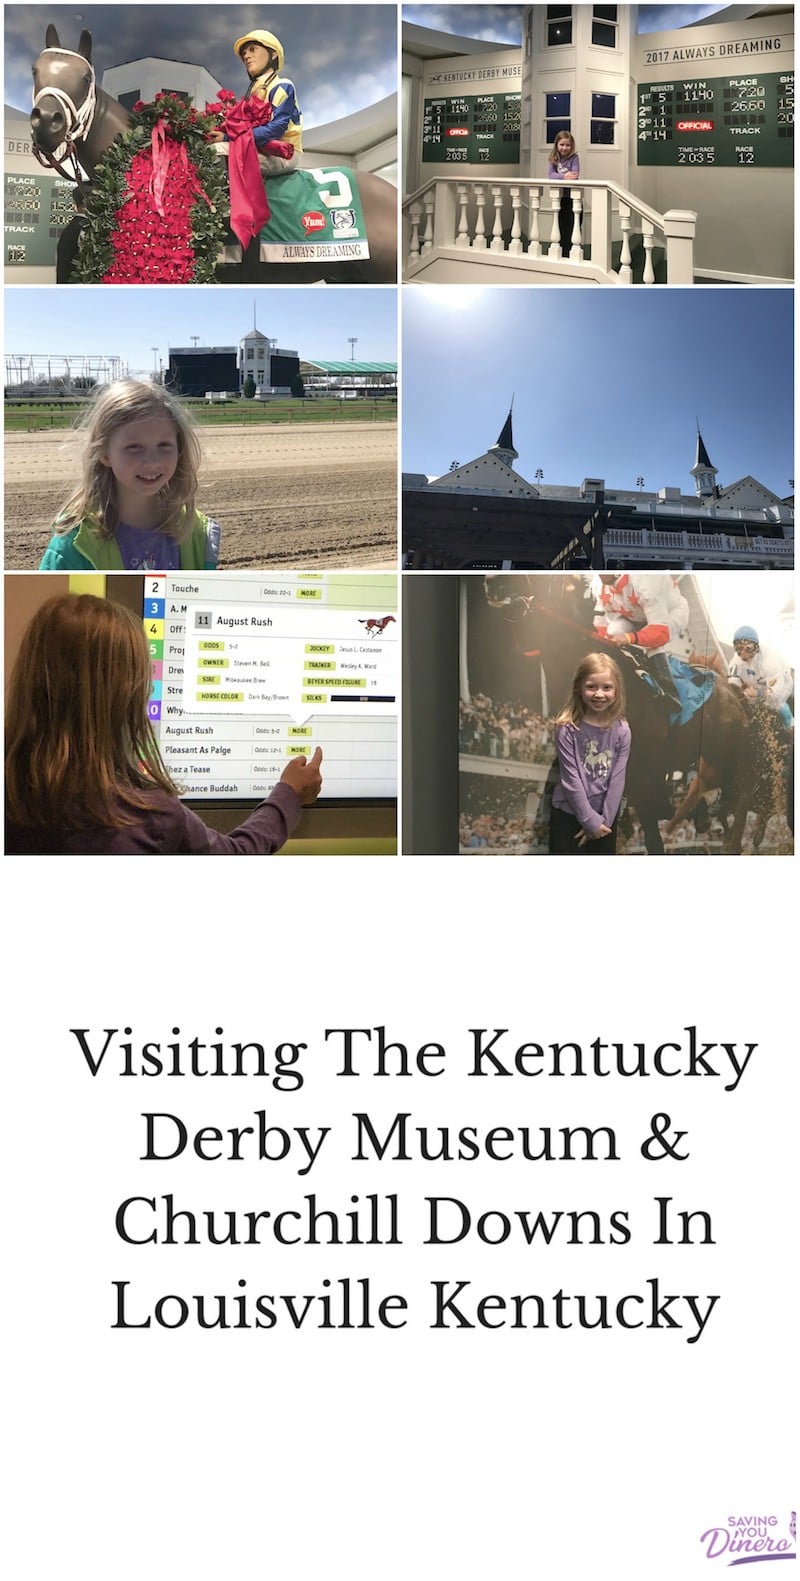 If you are planning a trip to Louisville Kentucky add a stop to the Kentucky Derby Museum at Churchill Downs. It's a very cool experience.